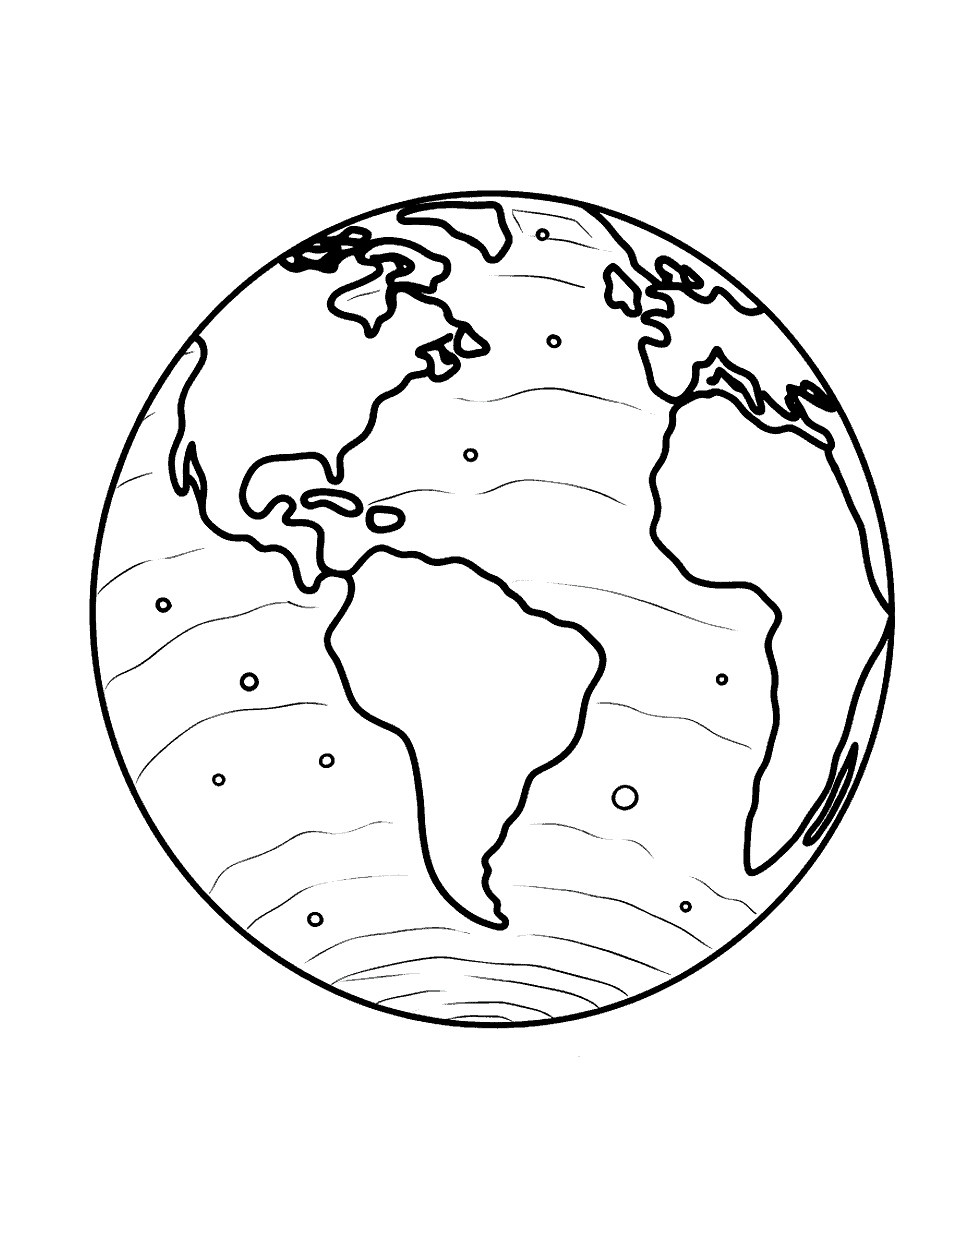 Earth from Space Solar System Coloring Page - A view of Earth from outer space.